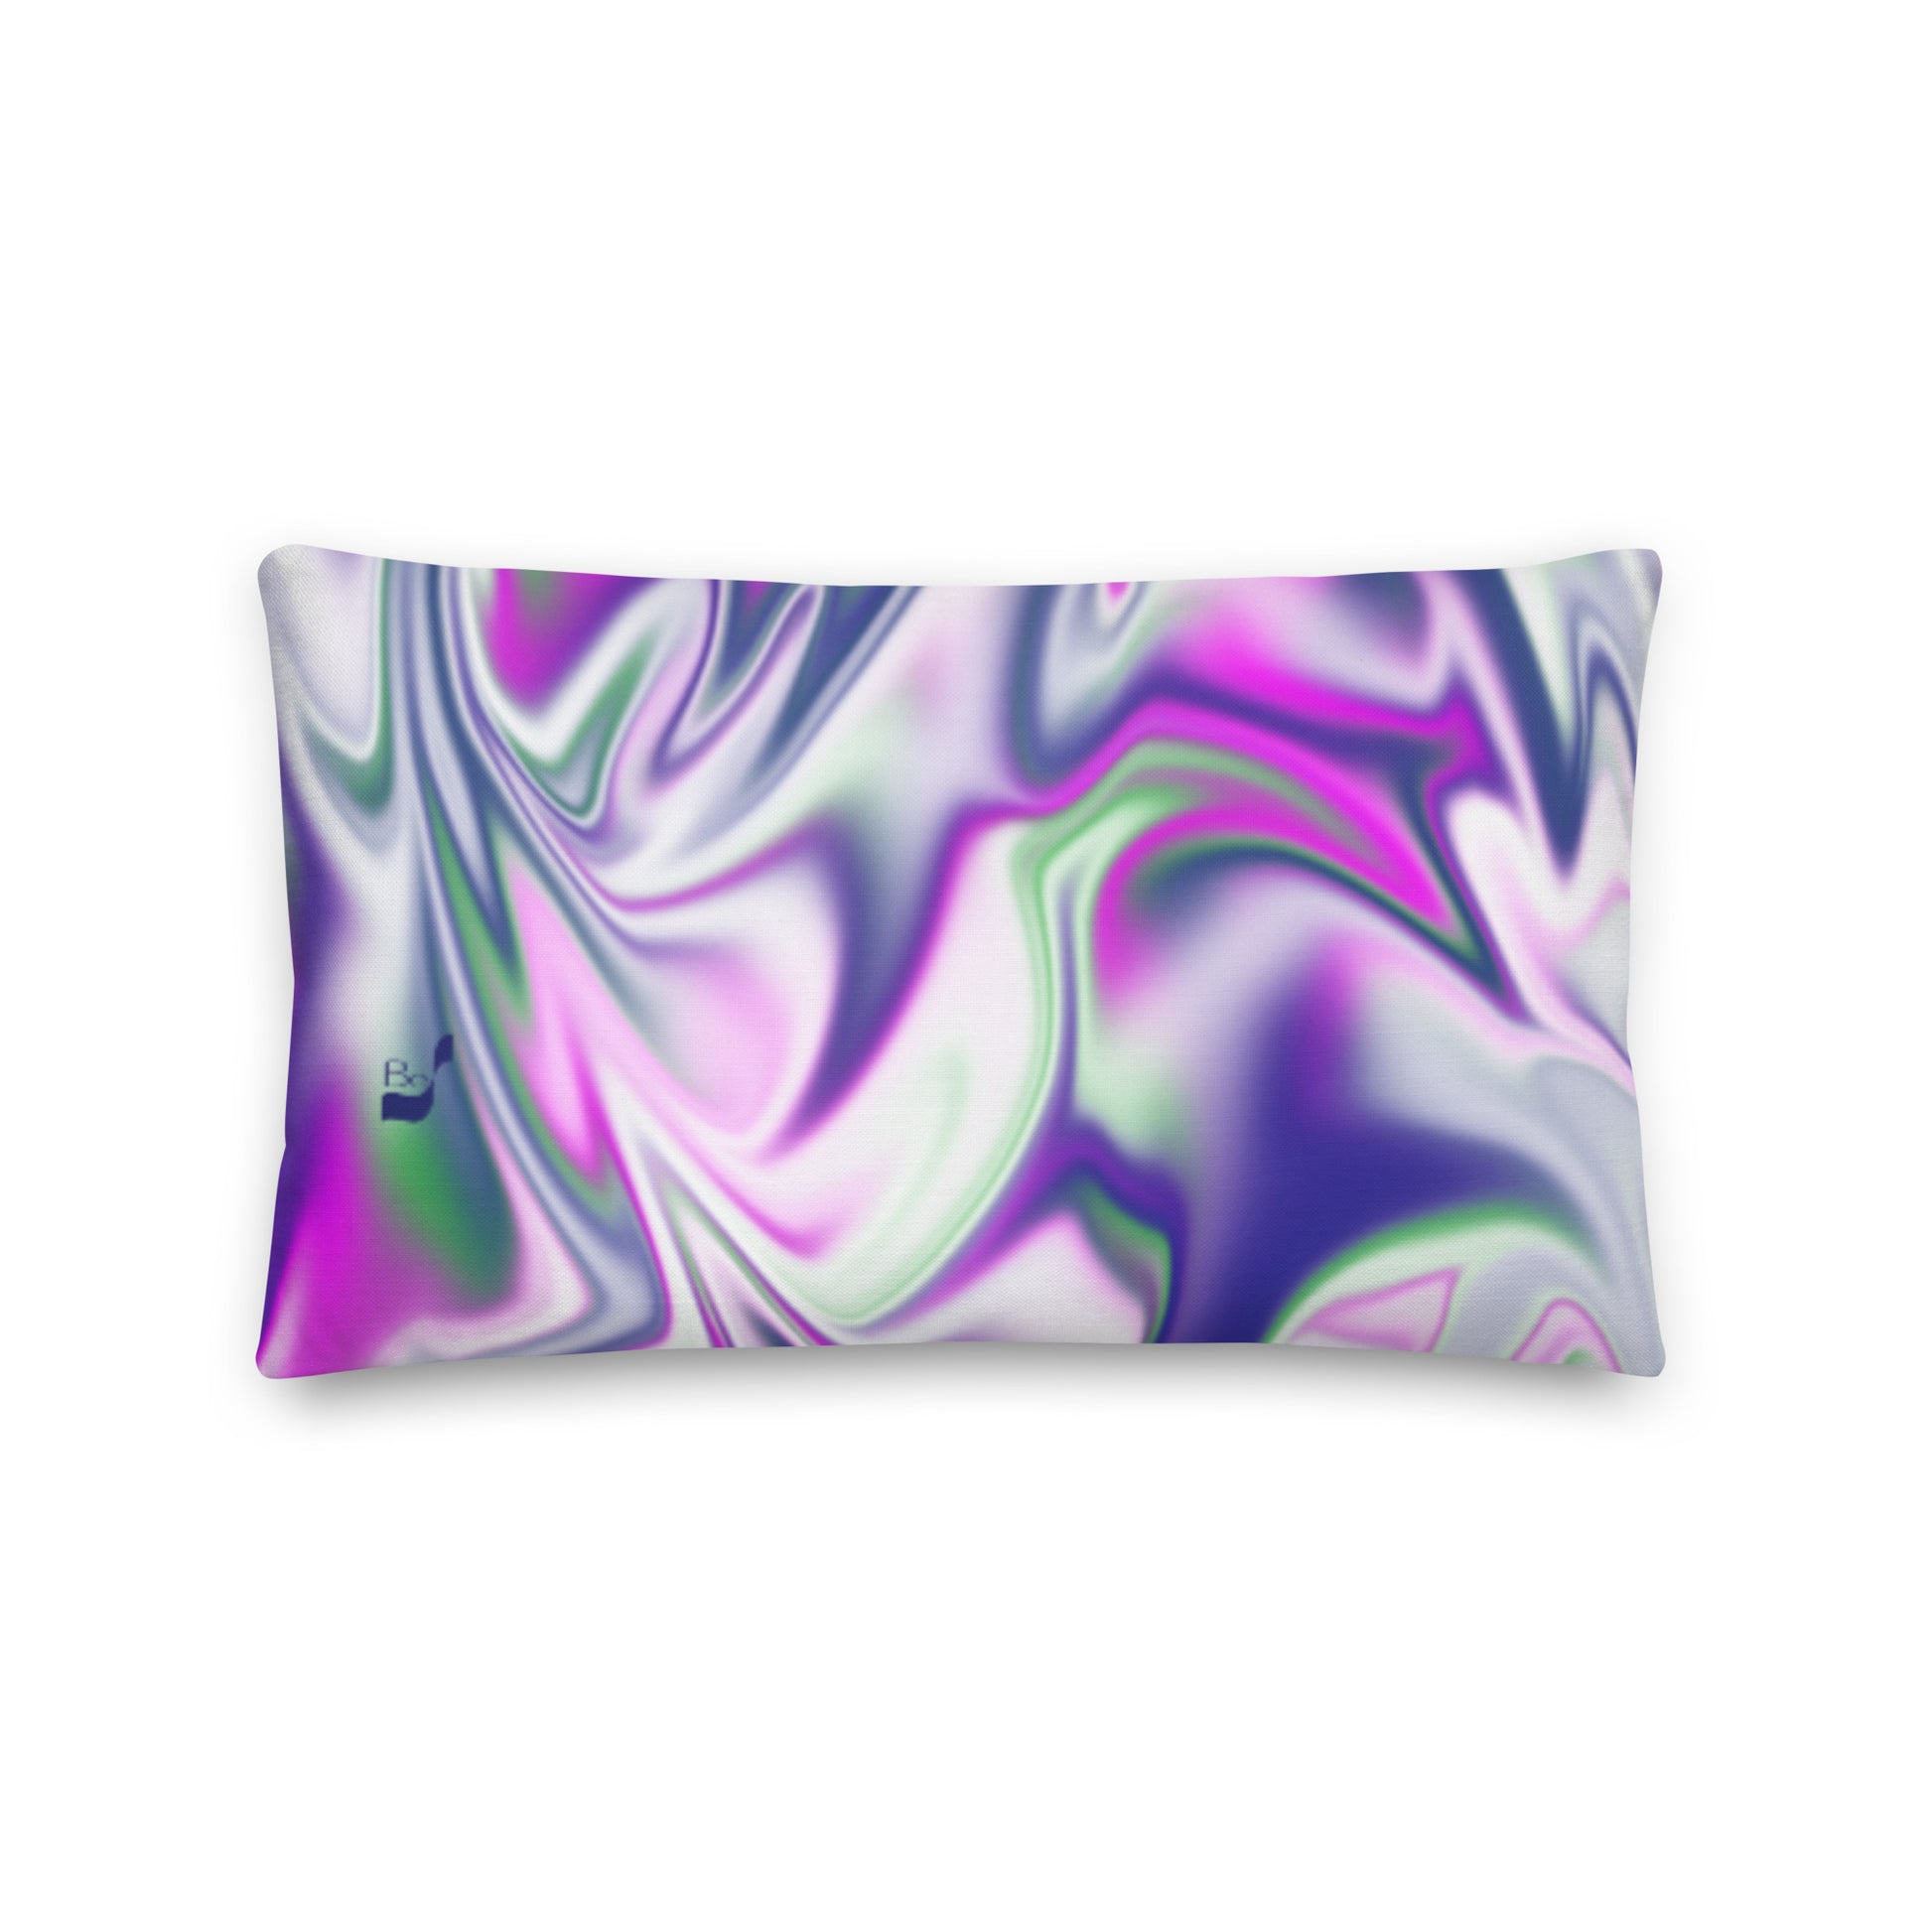 Burst BeSculpt Abstract Art Throw Pillow Reversed Image (Fabric with a linen feel)